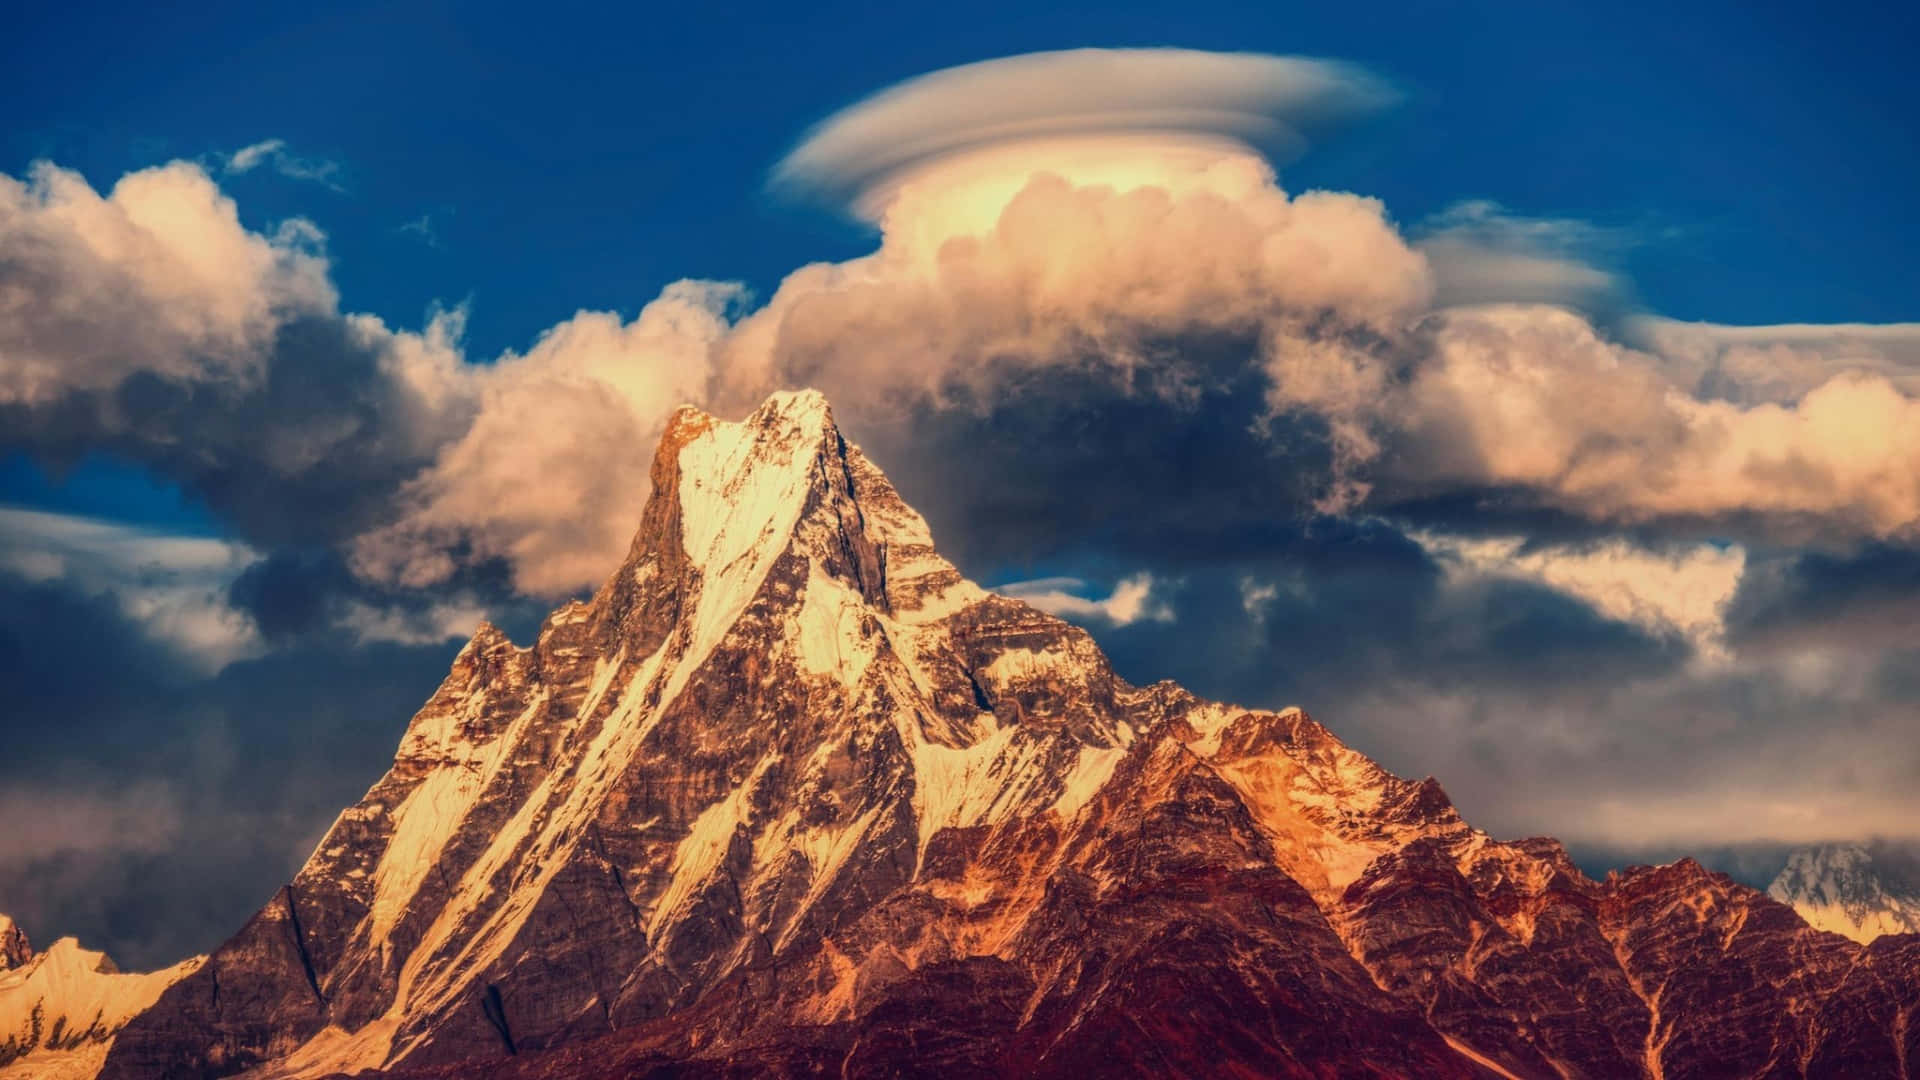 The Majestic Mountains of the Himalaya